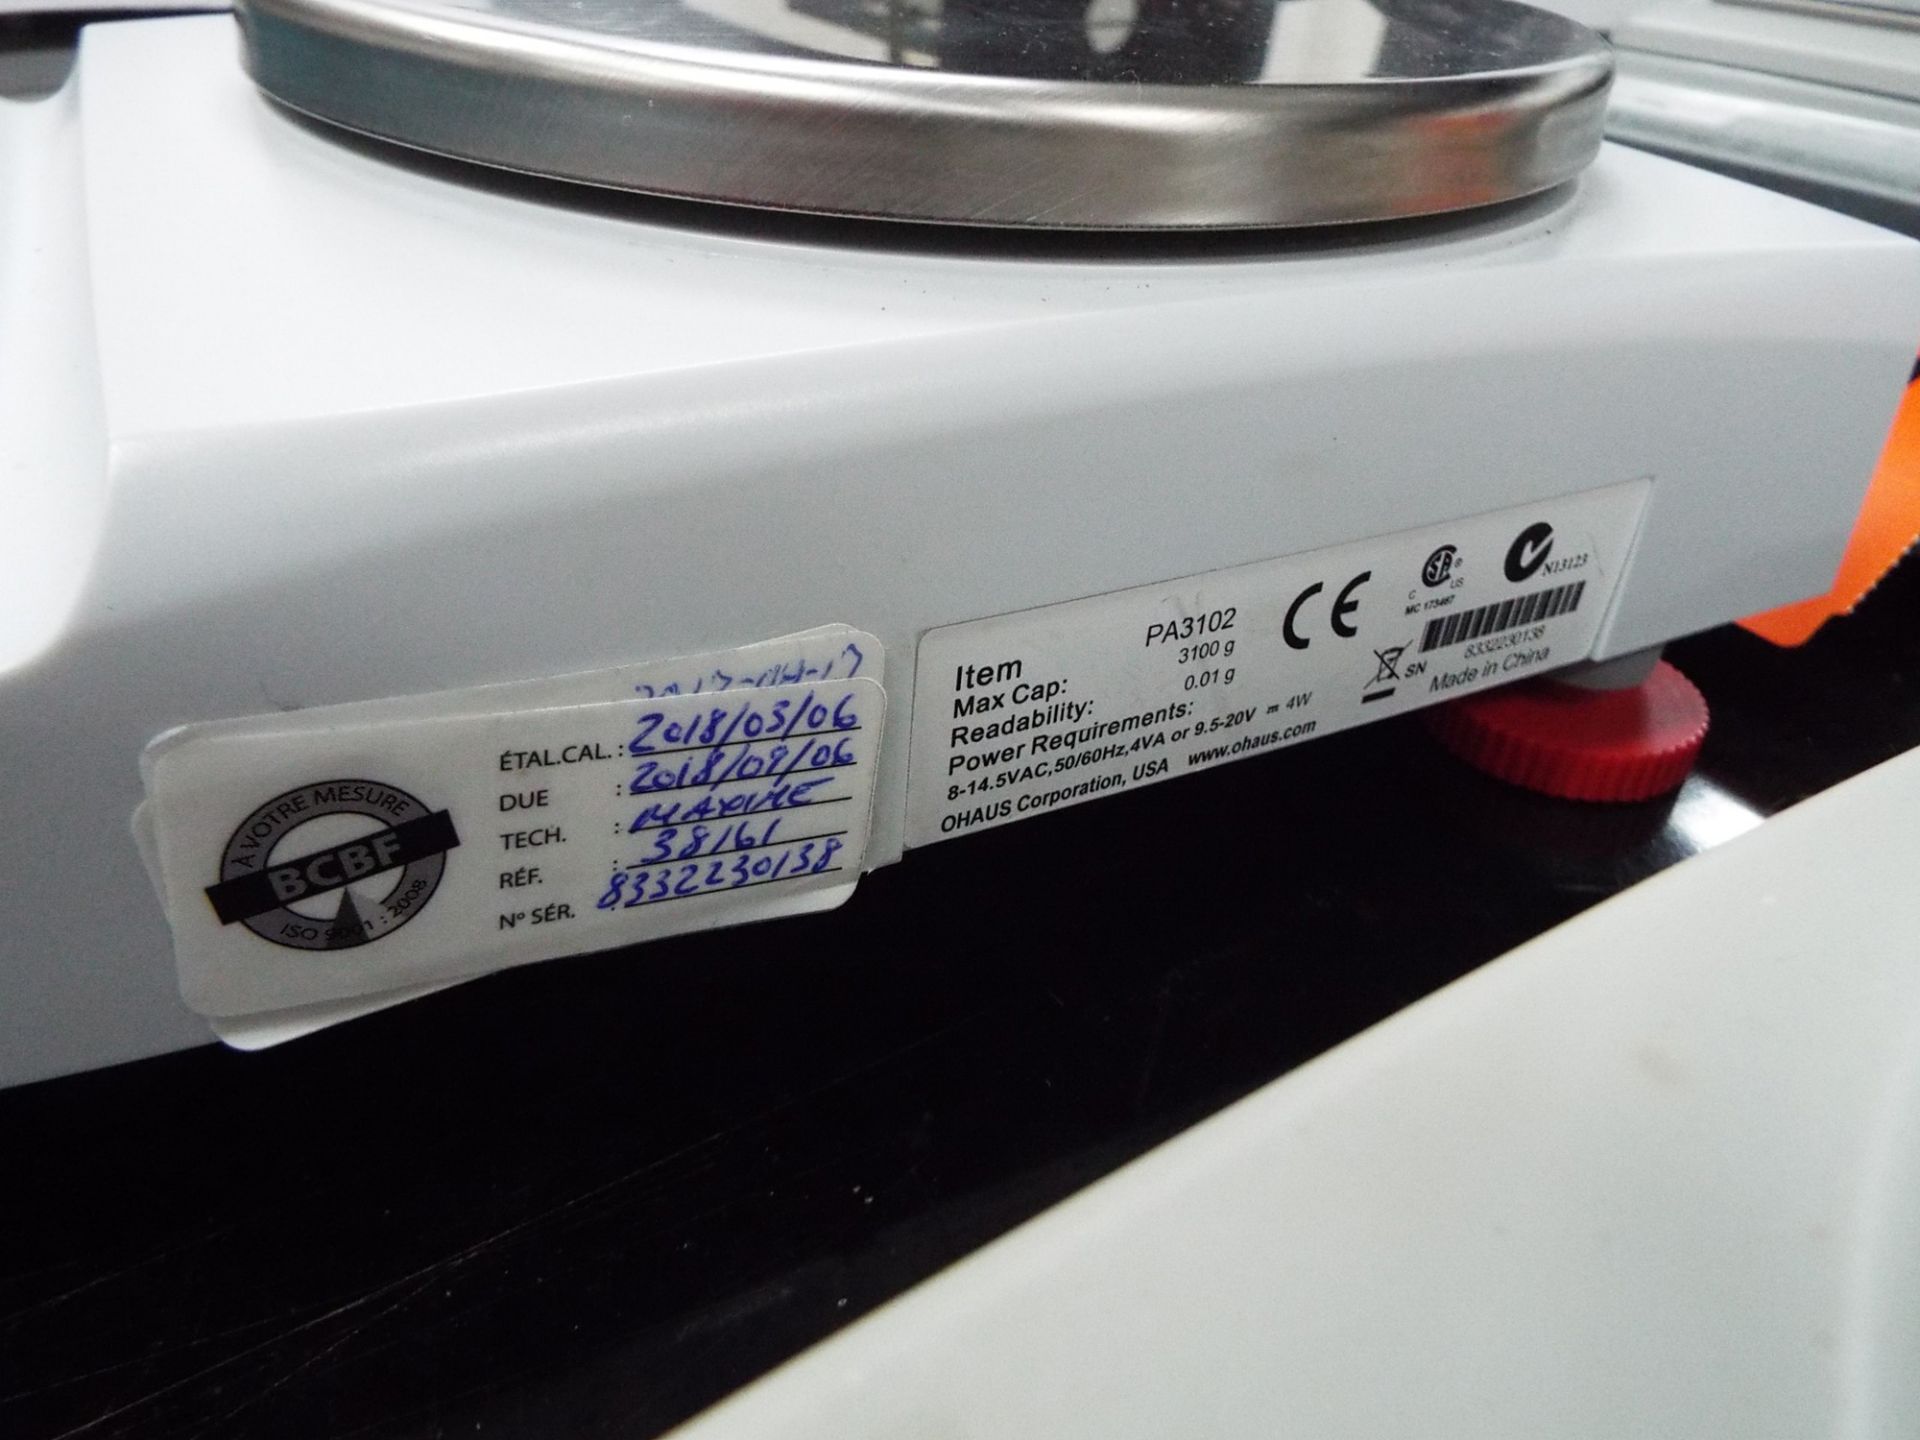 OHAUS PIONEER DIGITAL BALANCE SCALE WITH 3100G X 0.01G CAPACITY, S/N 8332230138 - Image 3 of 3